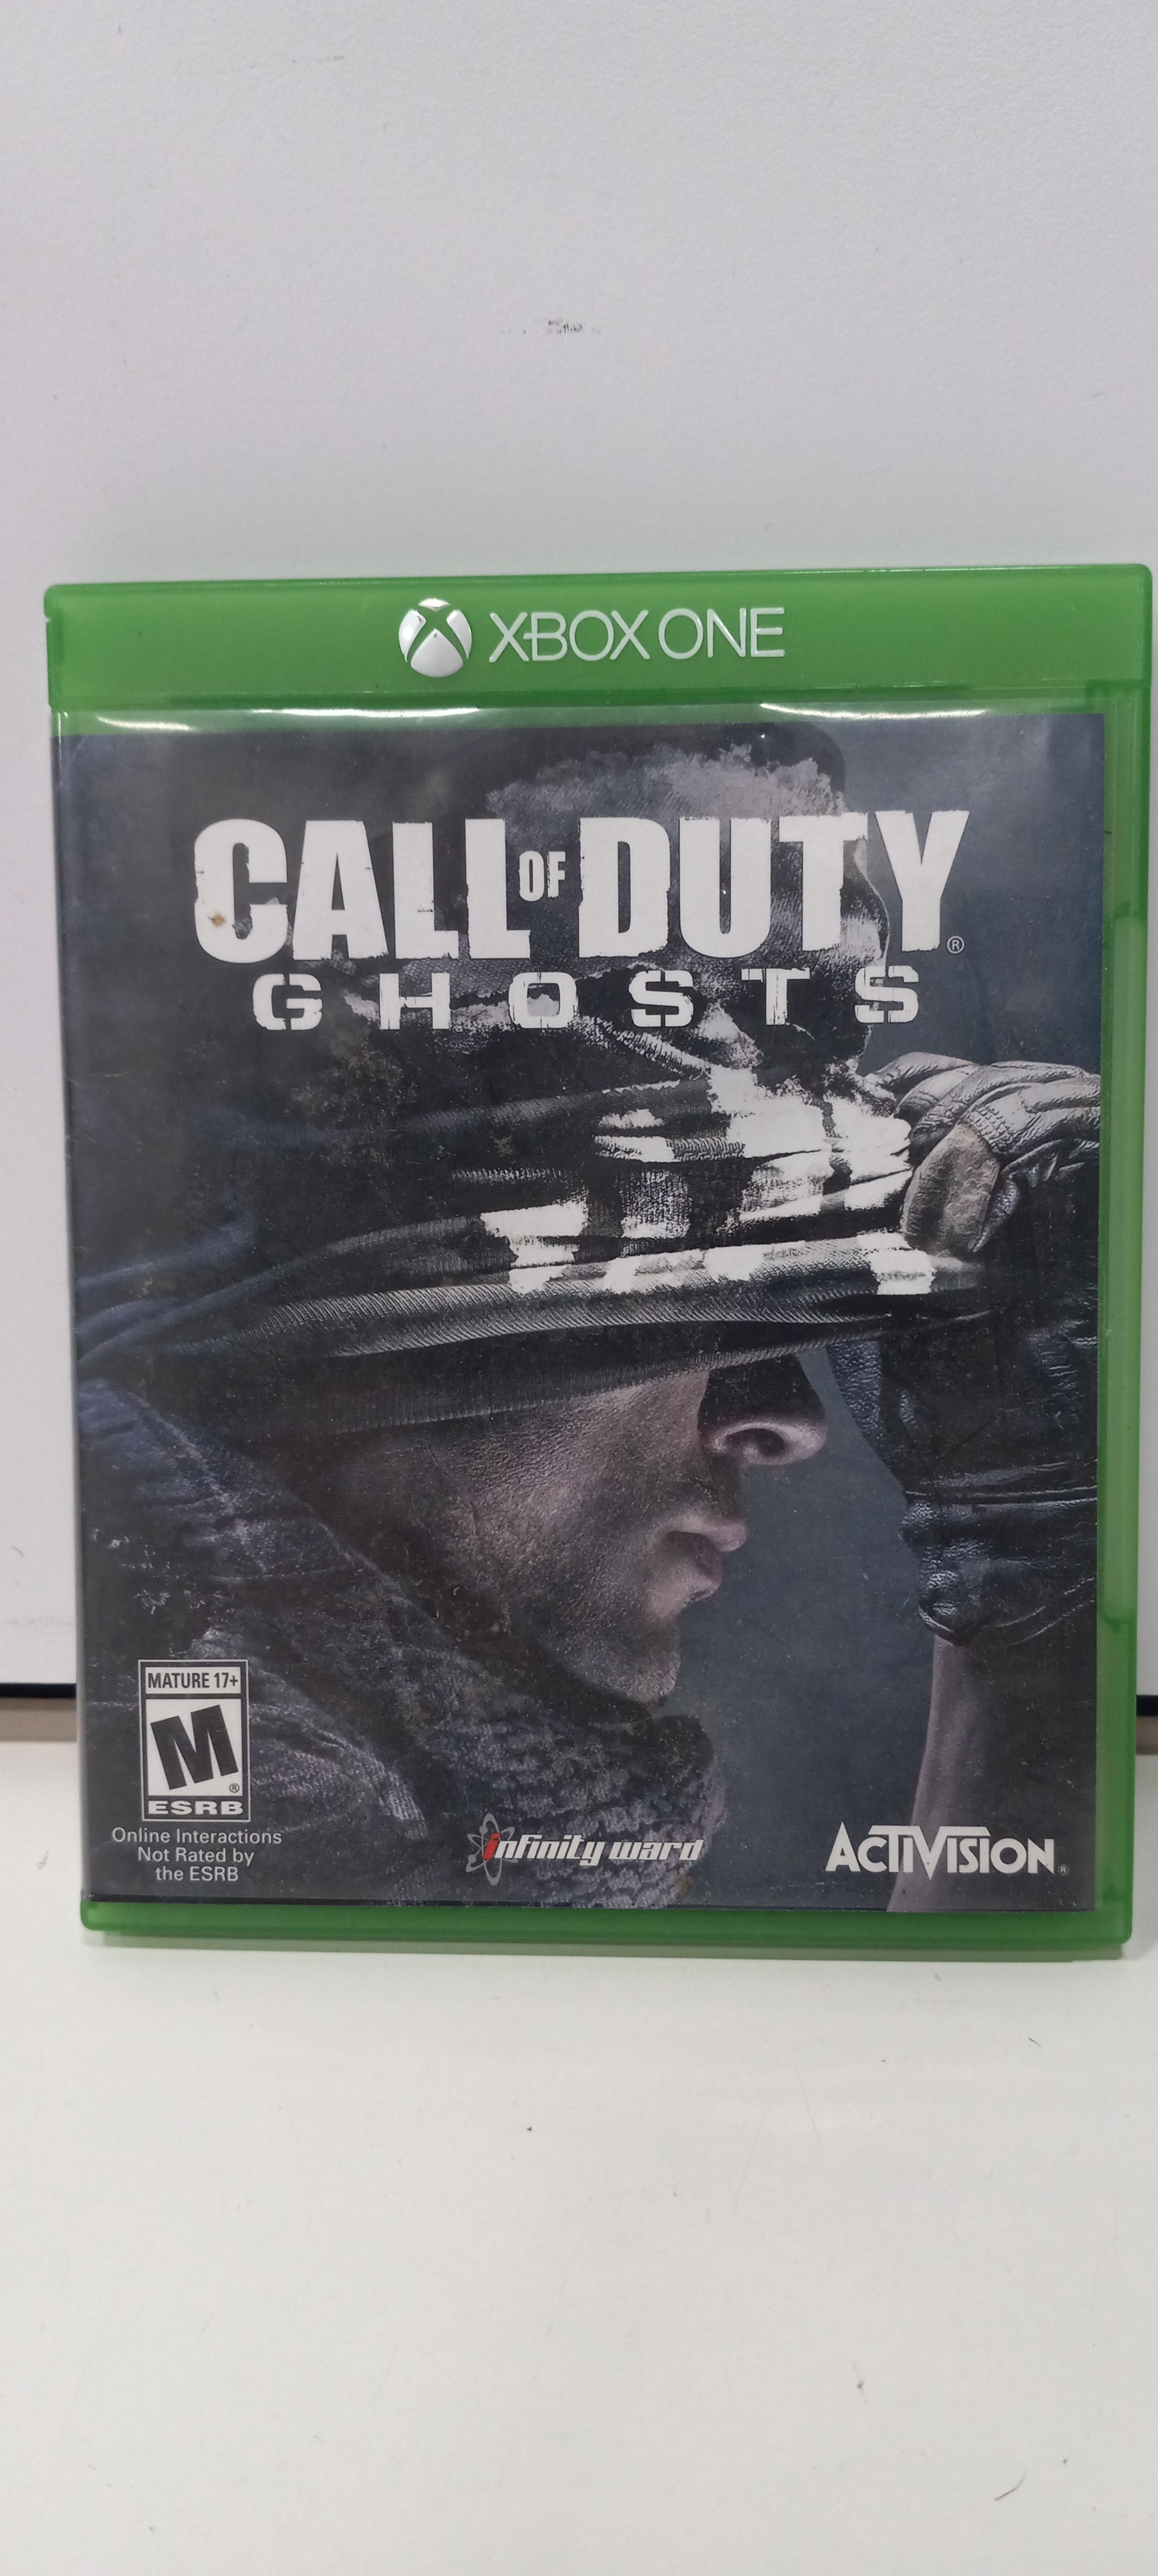 Call Of Duty Ghosts Xbox 360